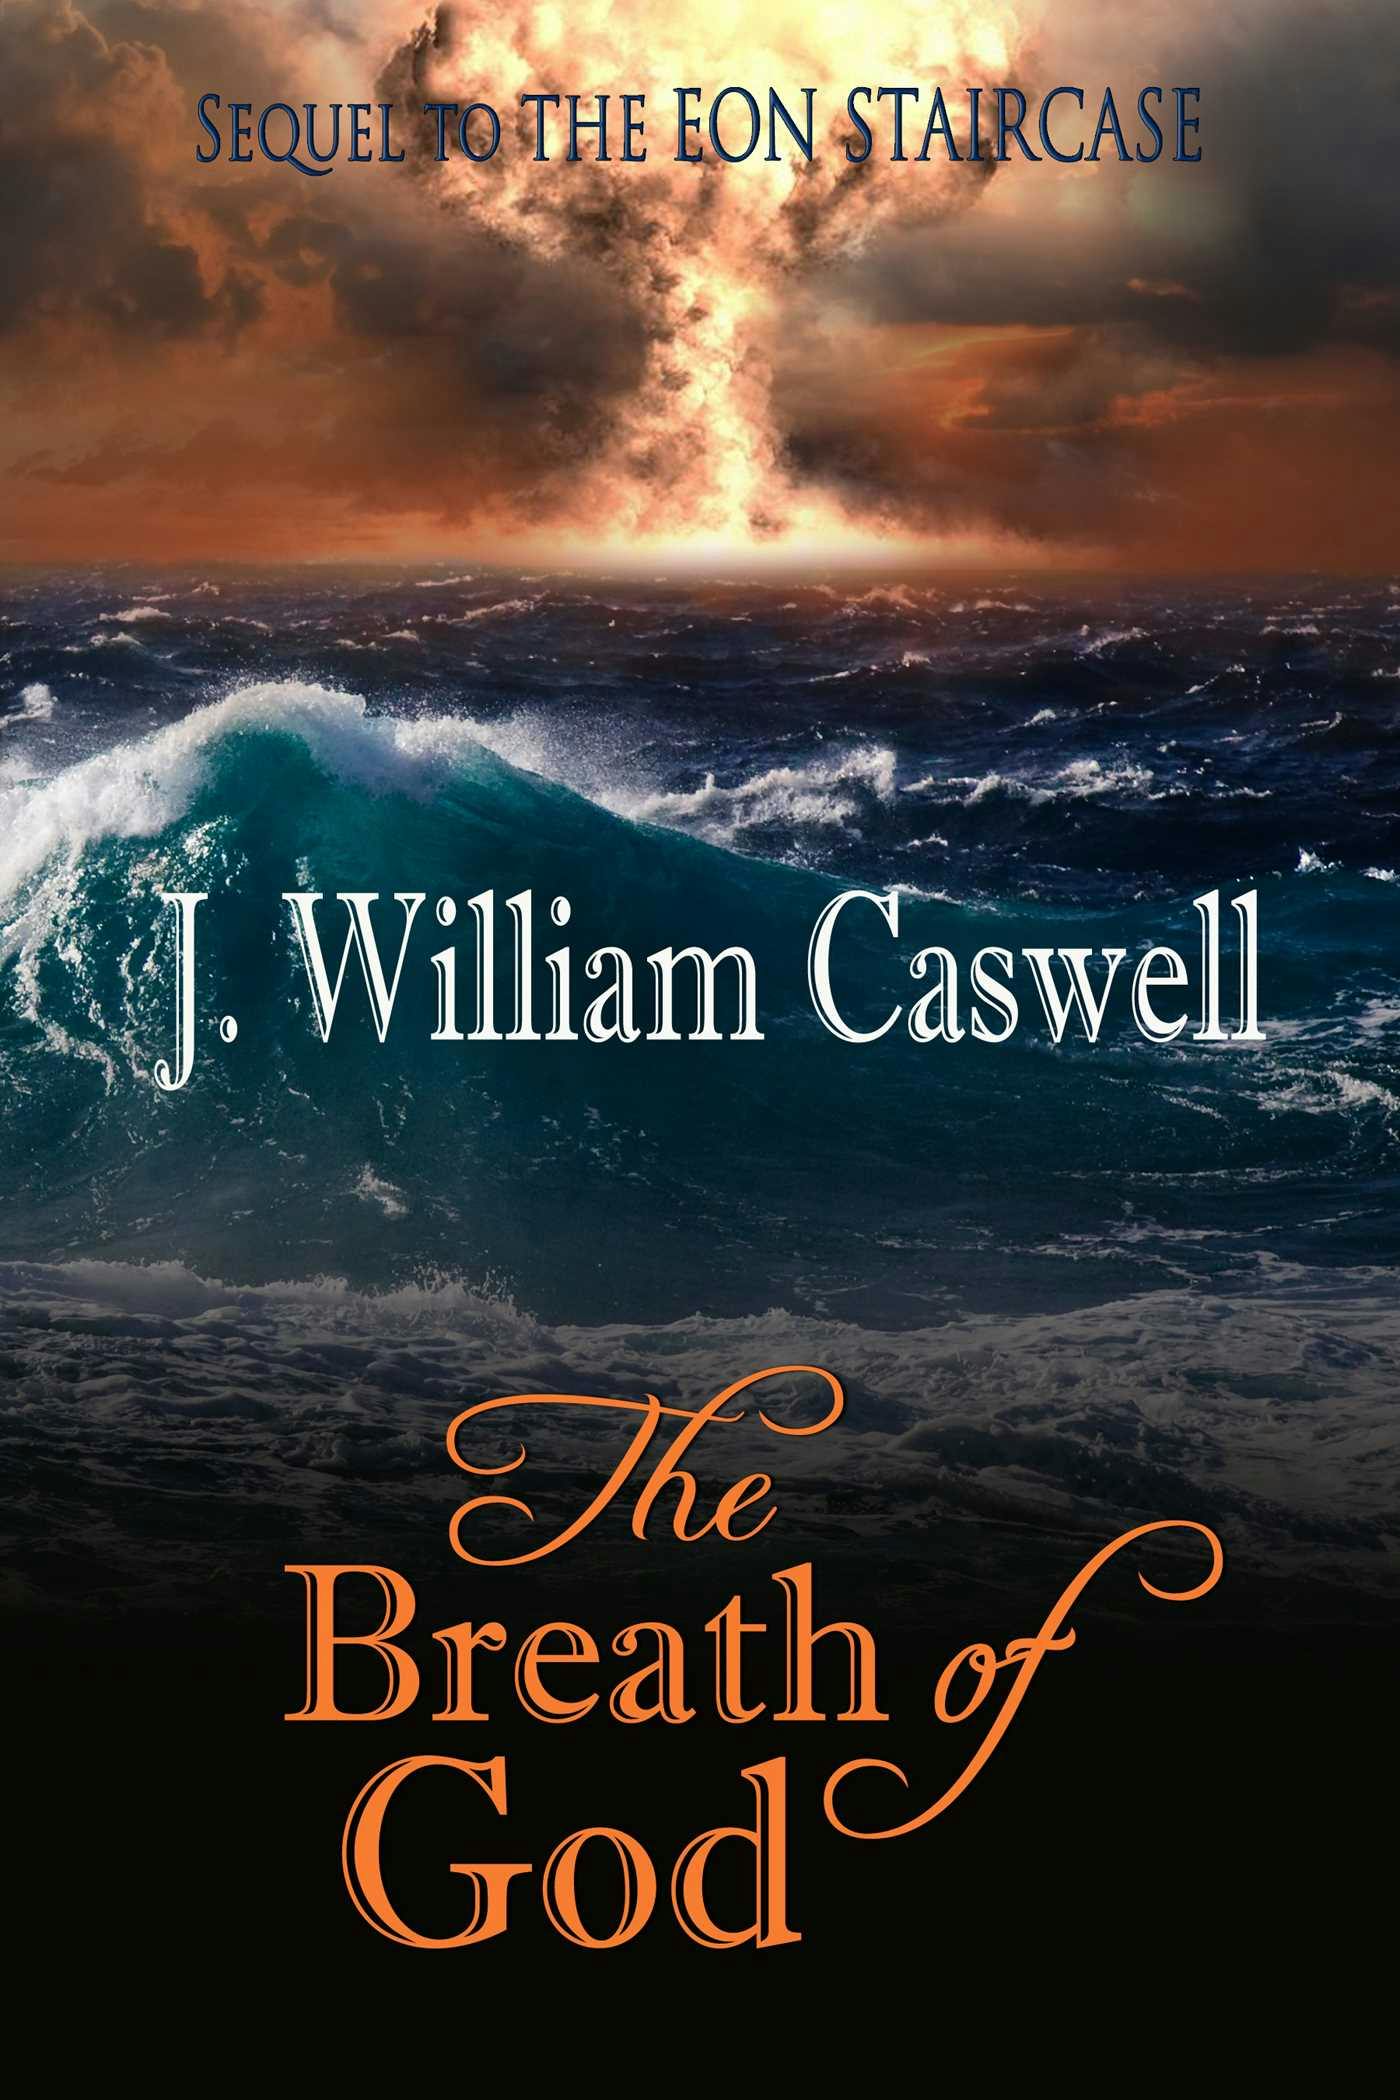 The Breath of God - James Caswell